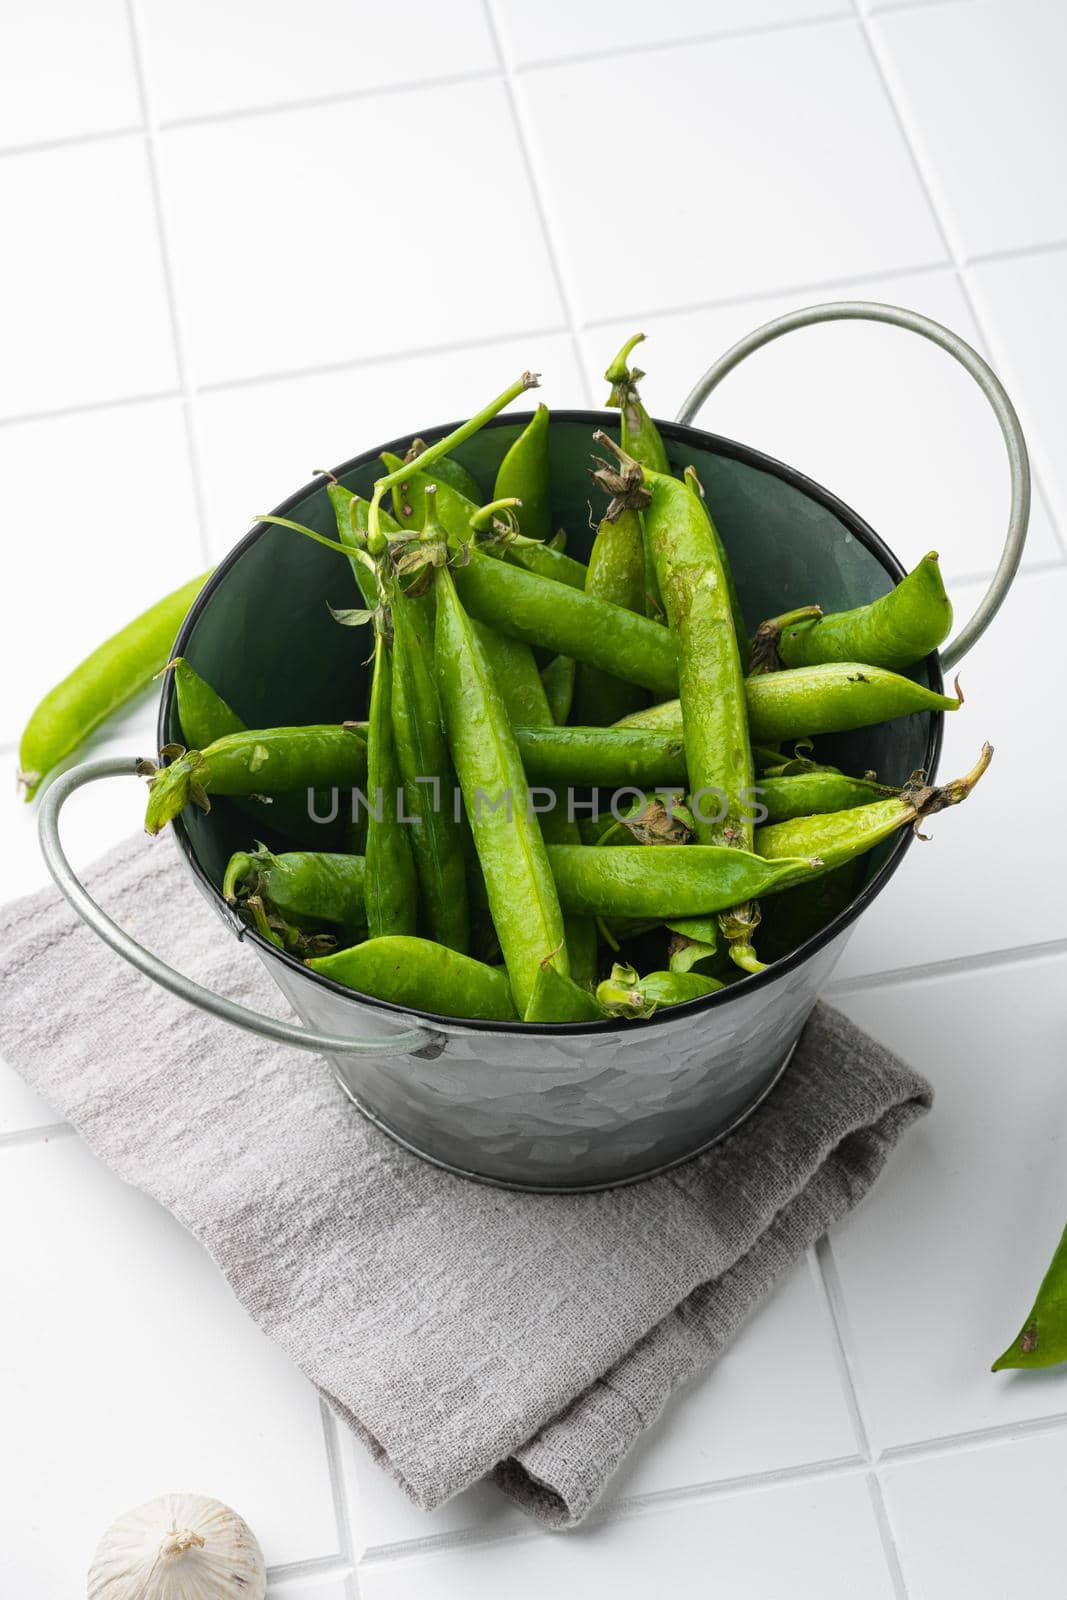 Pods of green peas, on white ceramic squared tile table background